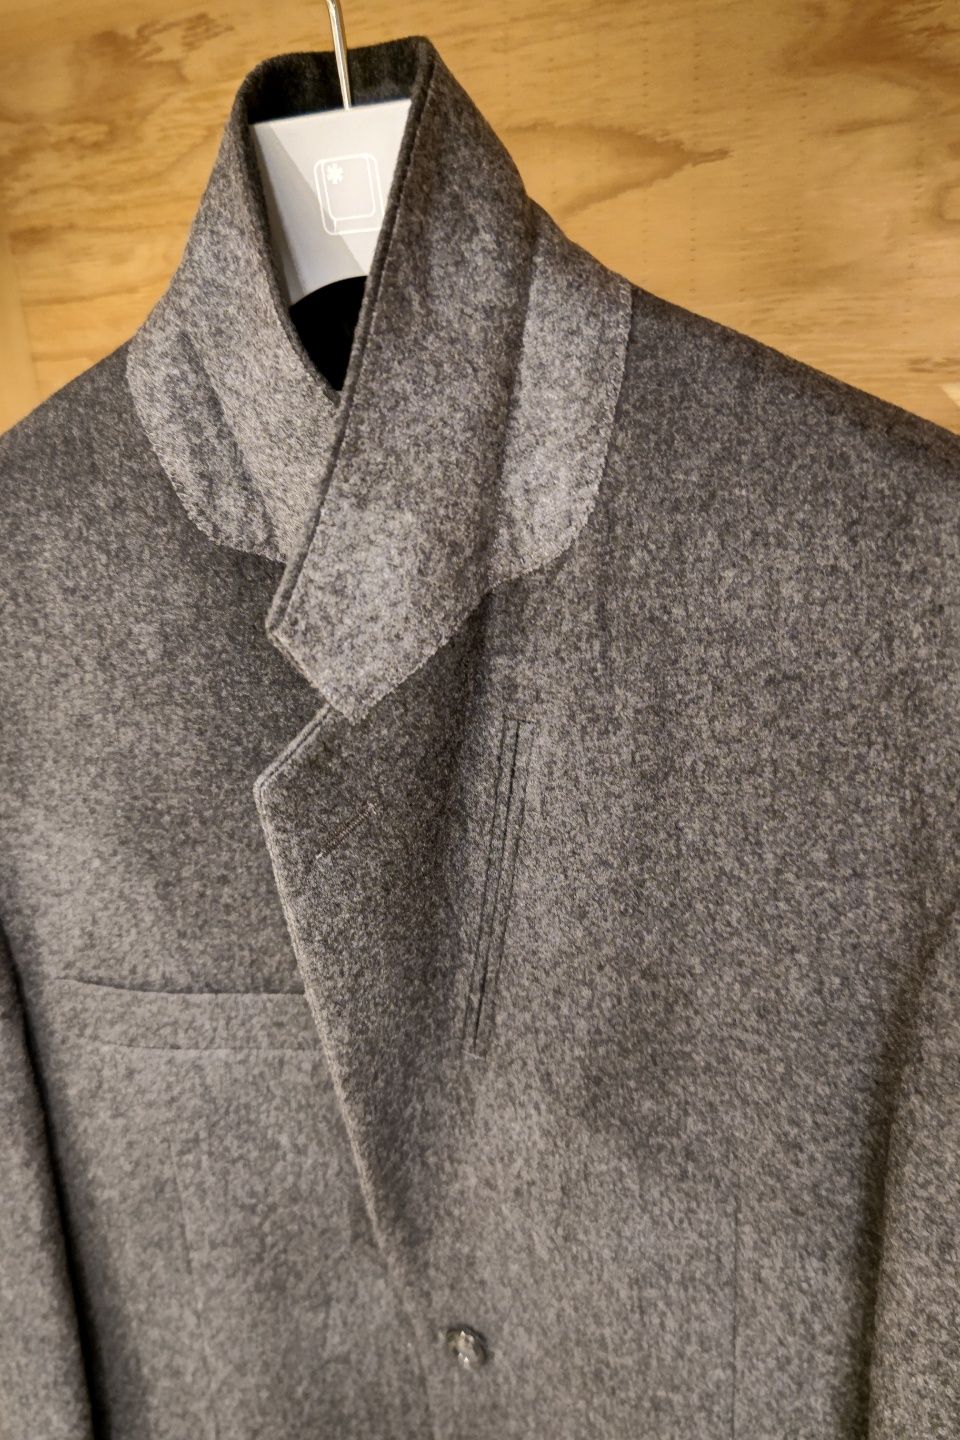 WEWILL - tailored square jacket -gray- 22aw | asterisk